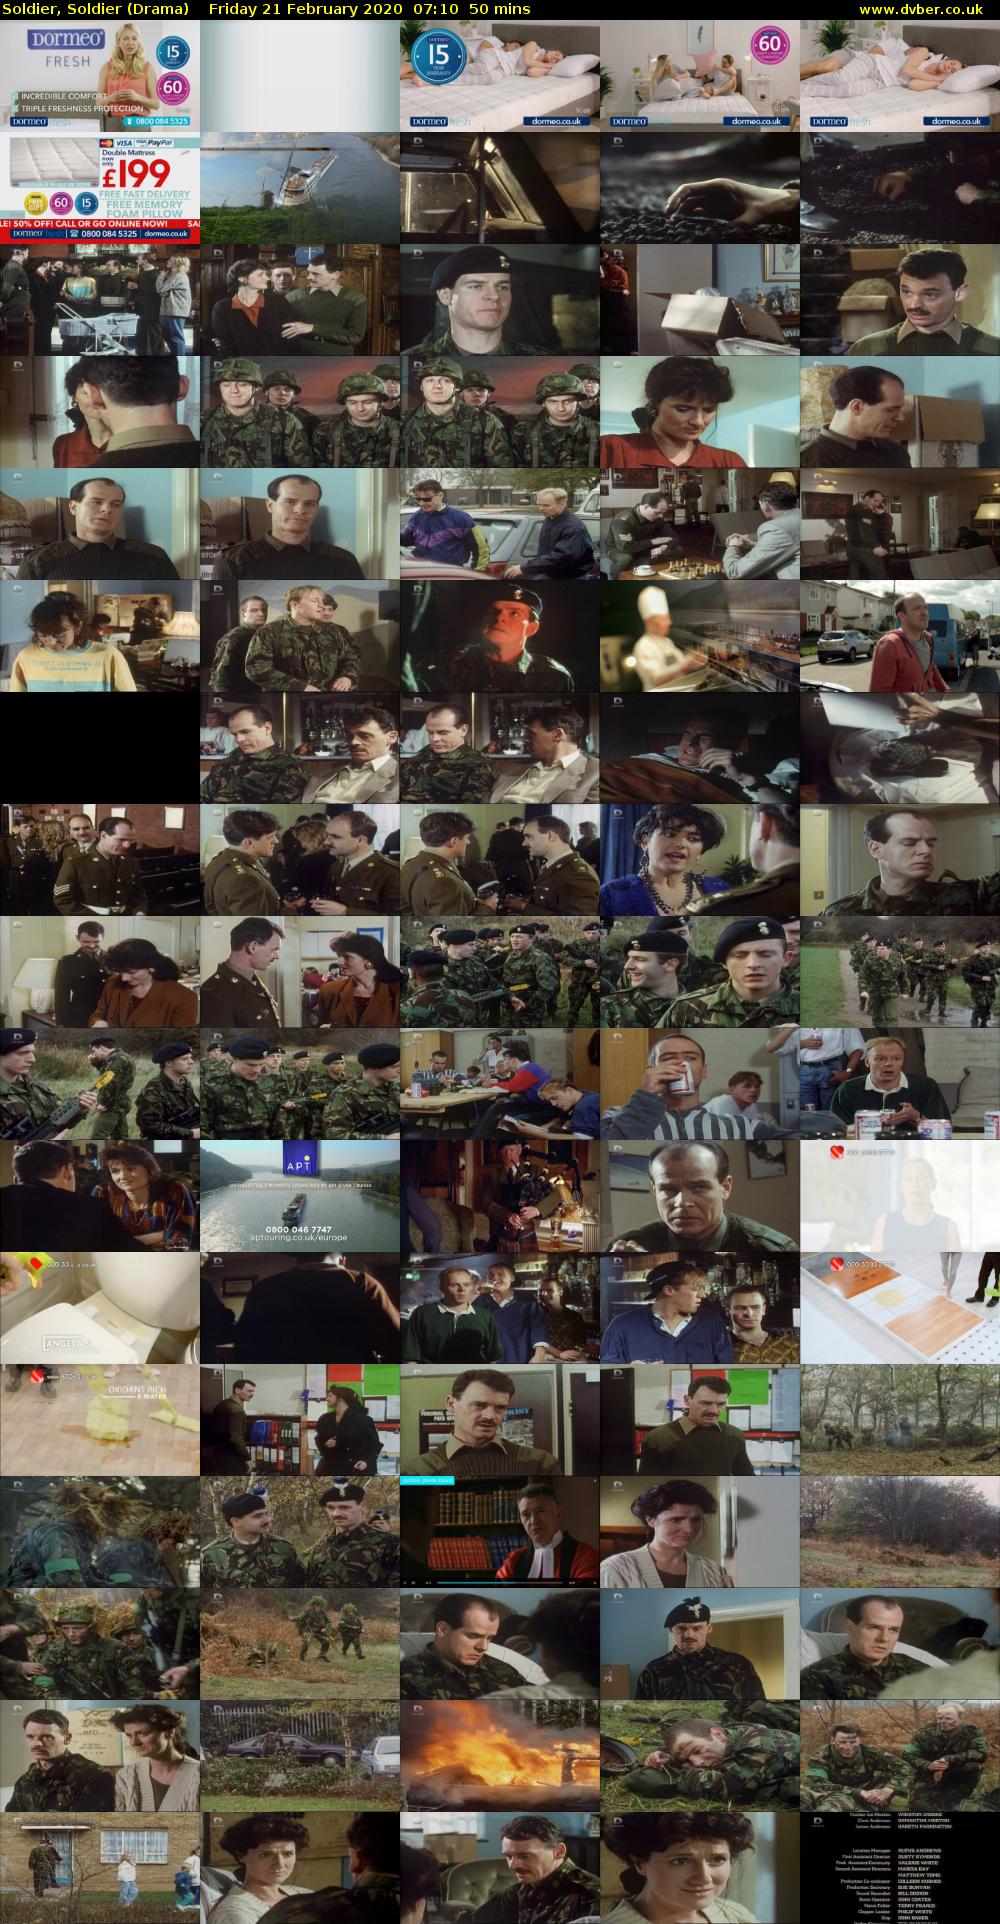 Soldier, Soldier (Drama) Friday 21 February 2020 07:10 - 08:00